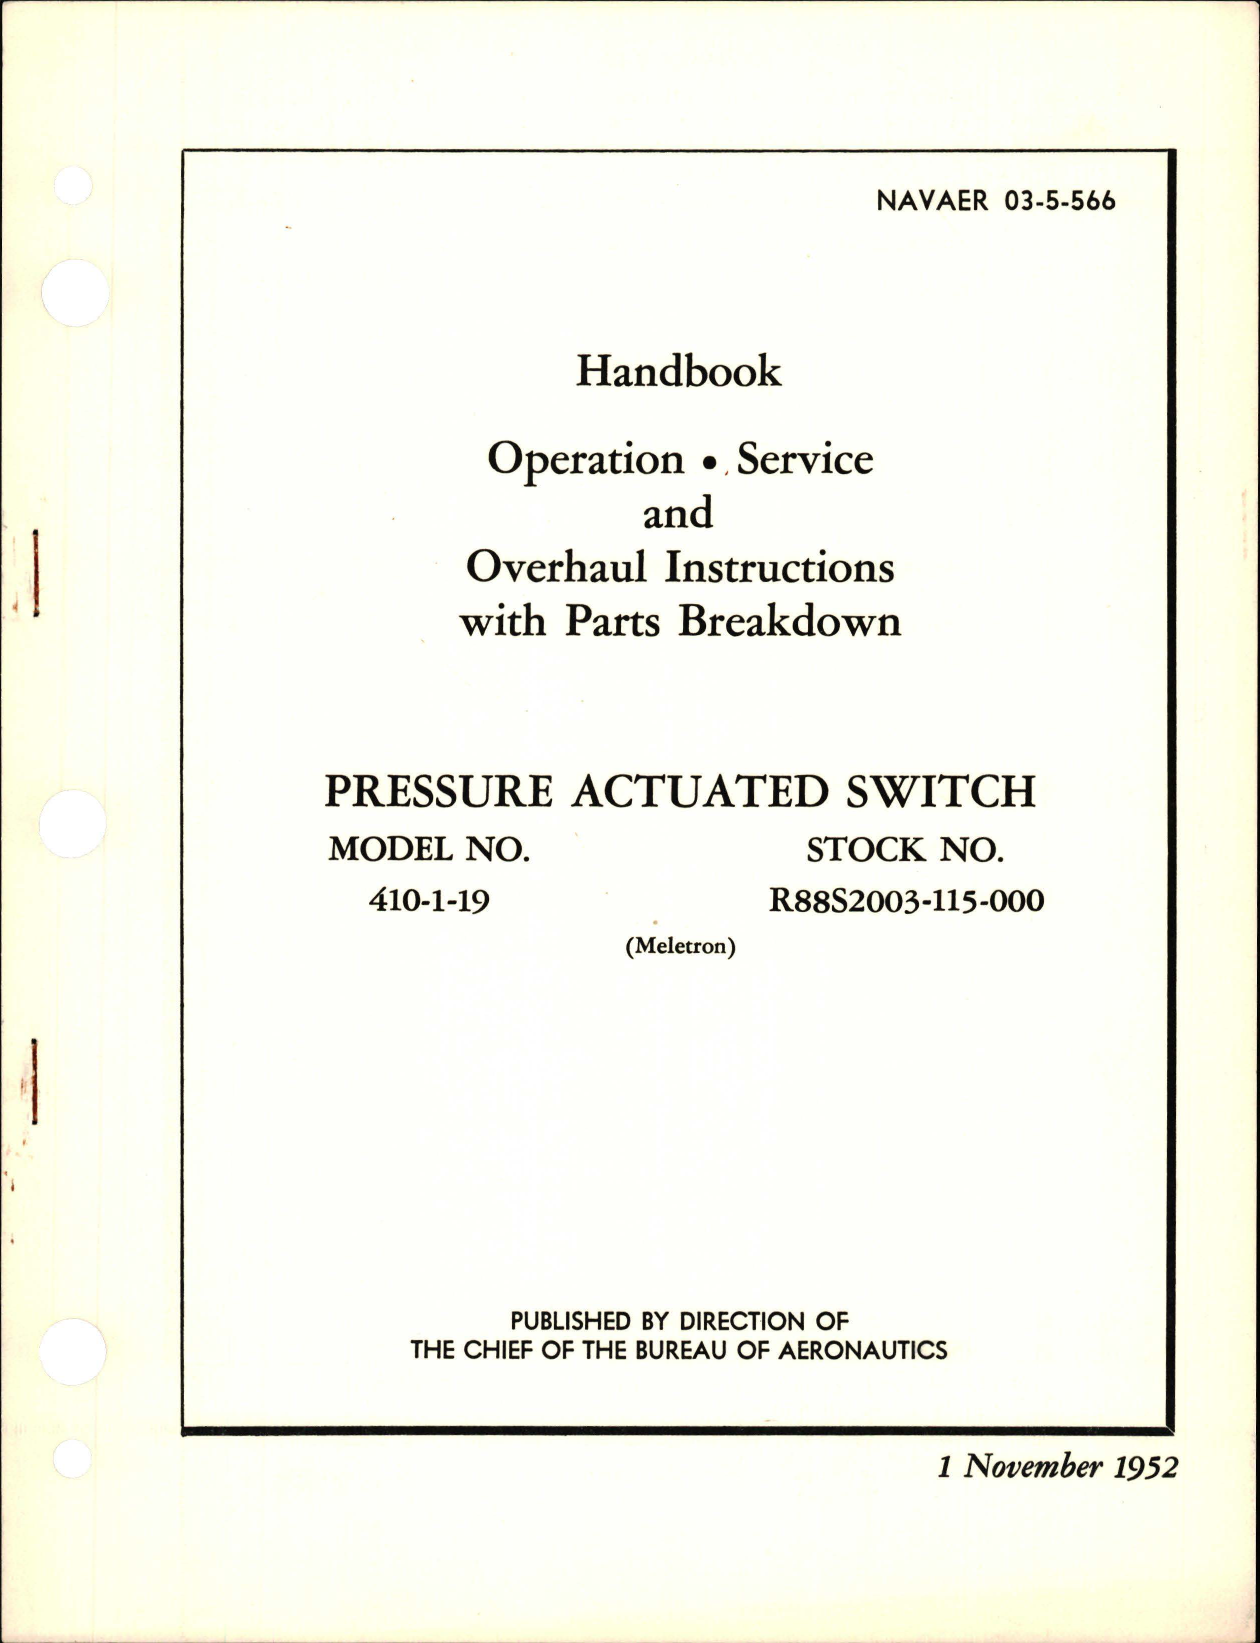 Sample page 1 from AirCorps Library document: Operation, Service and Overhaul Instructions with Parts Breakdown for Pressure Actuated Switch - Model 410-1-19